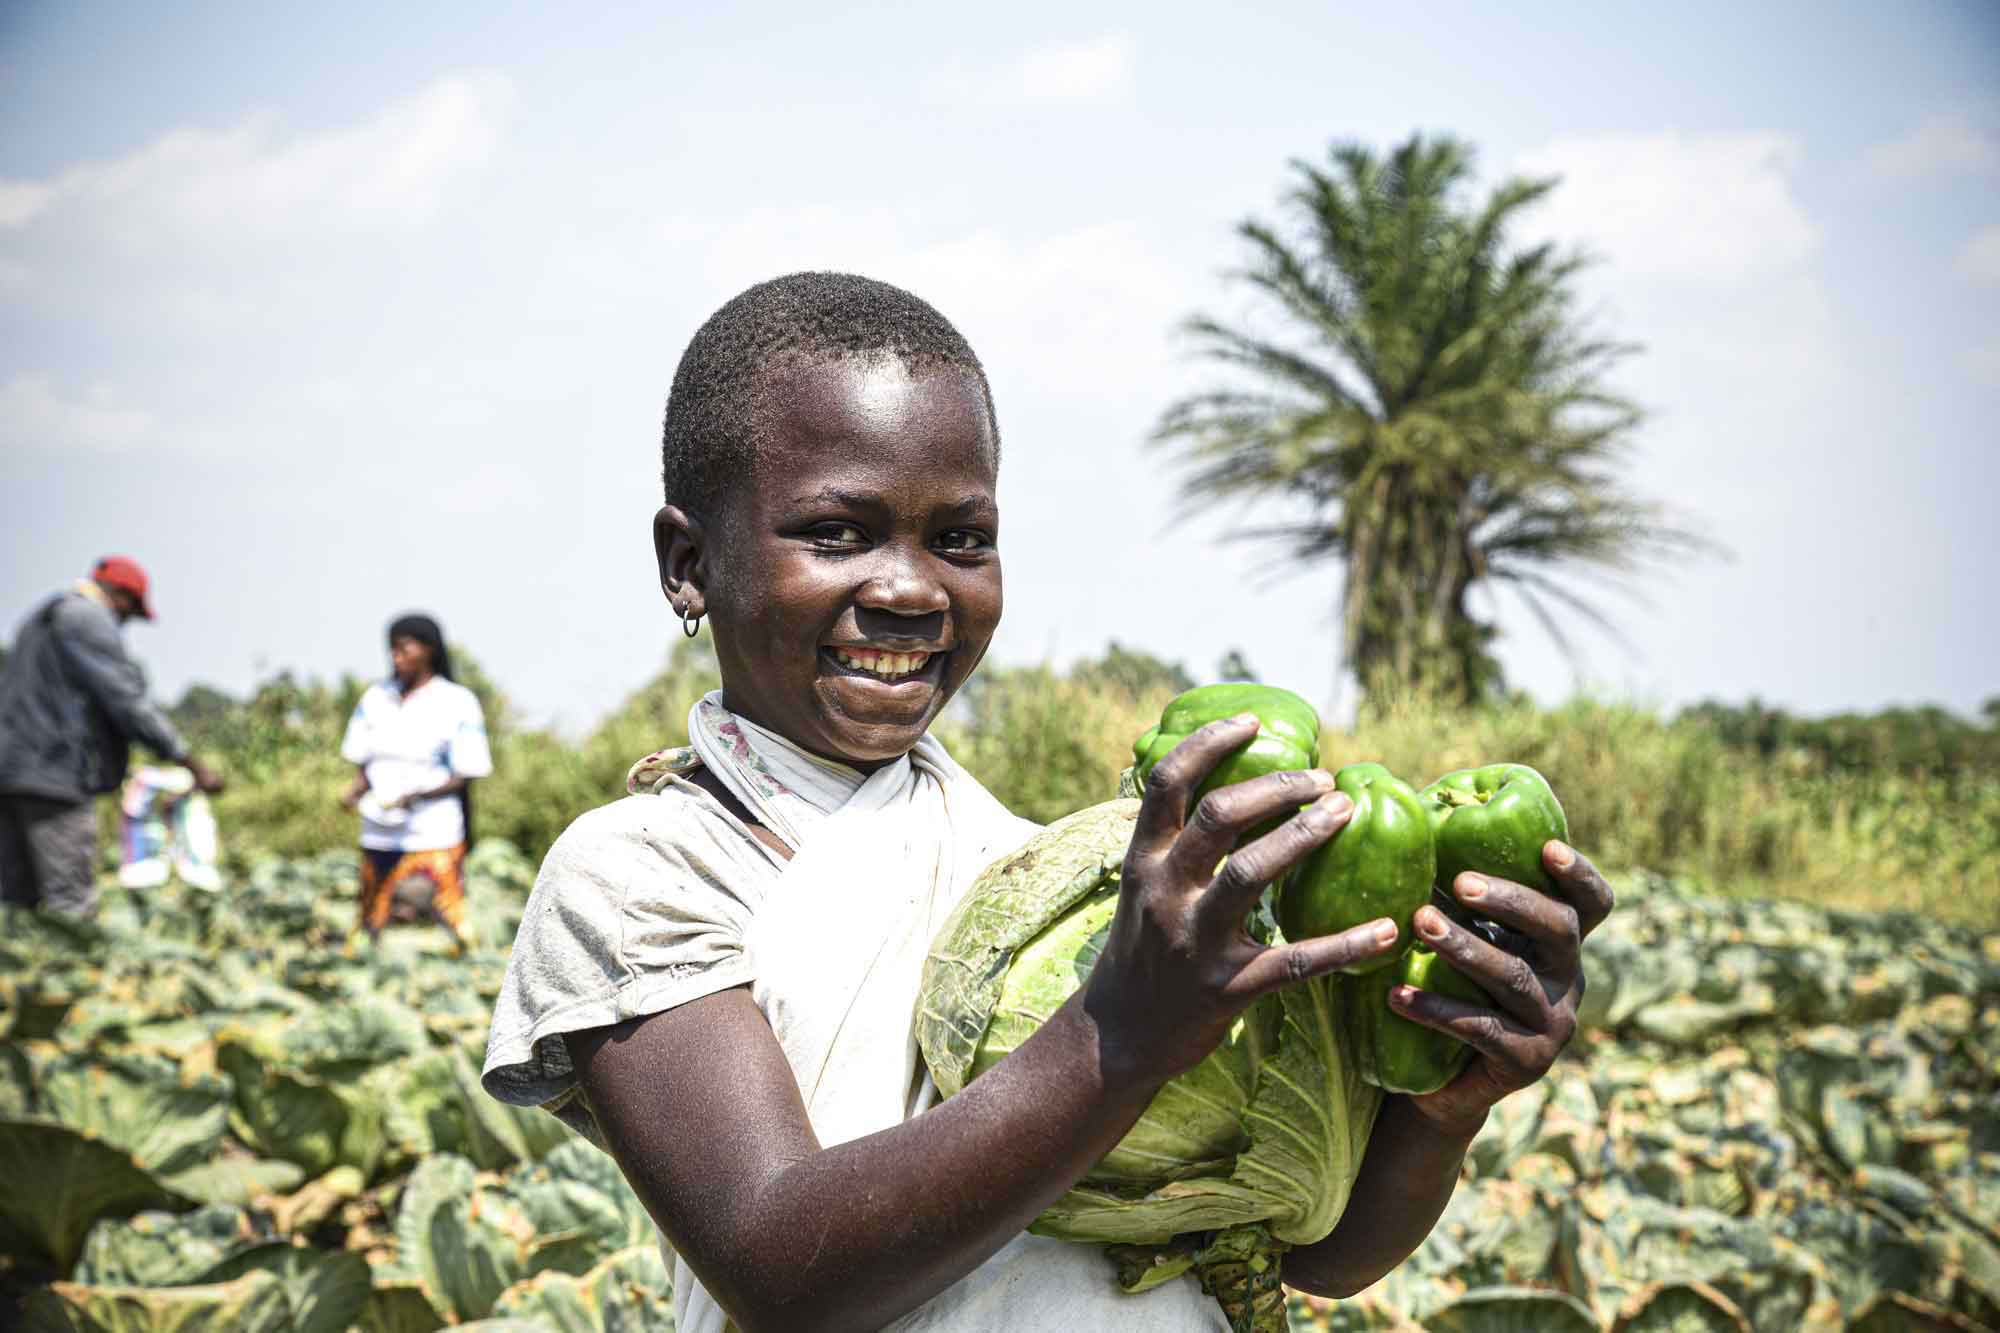 A young girl smiles as she harvests green peppers and cabbage from a field.  